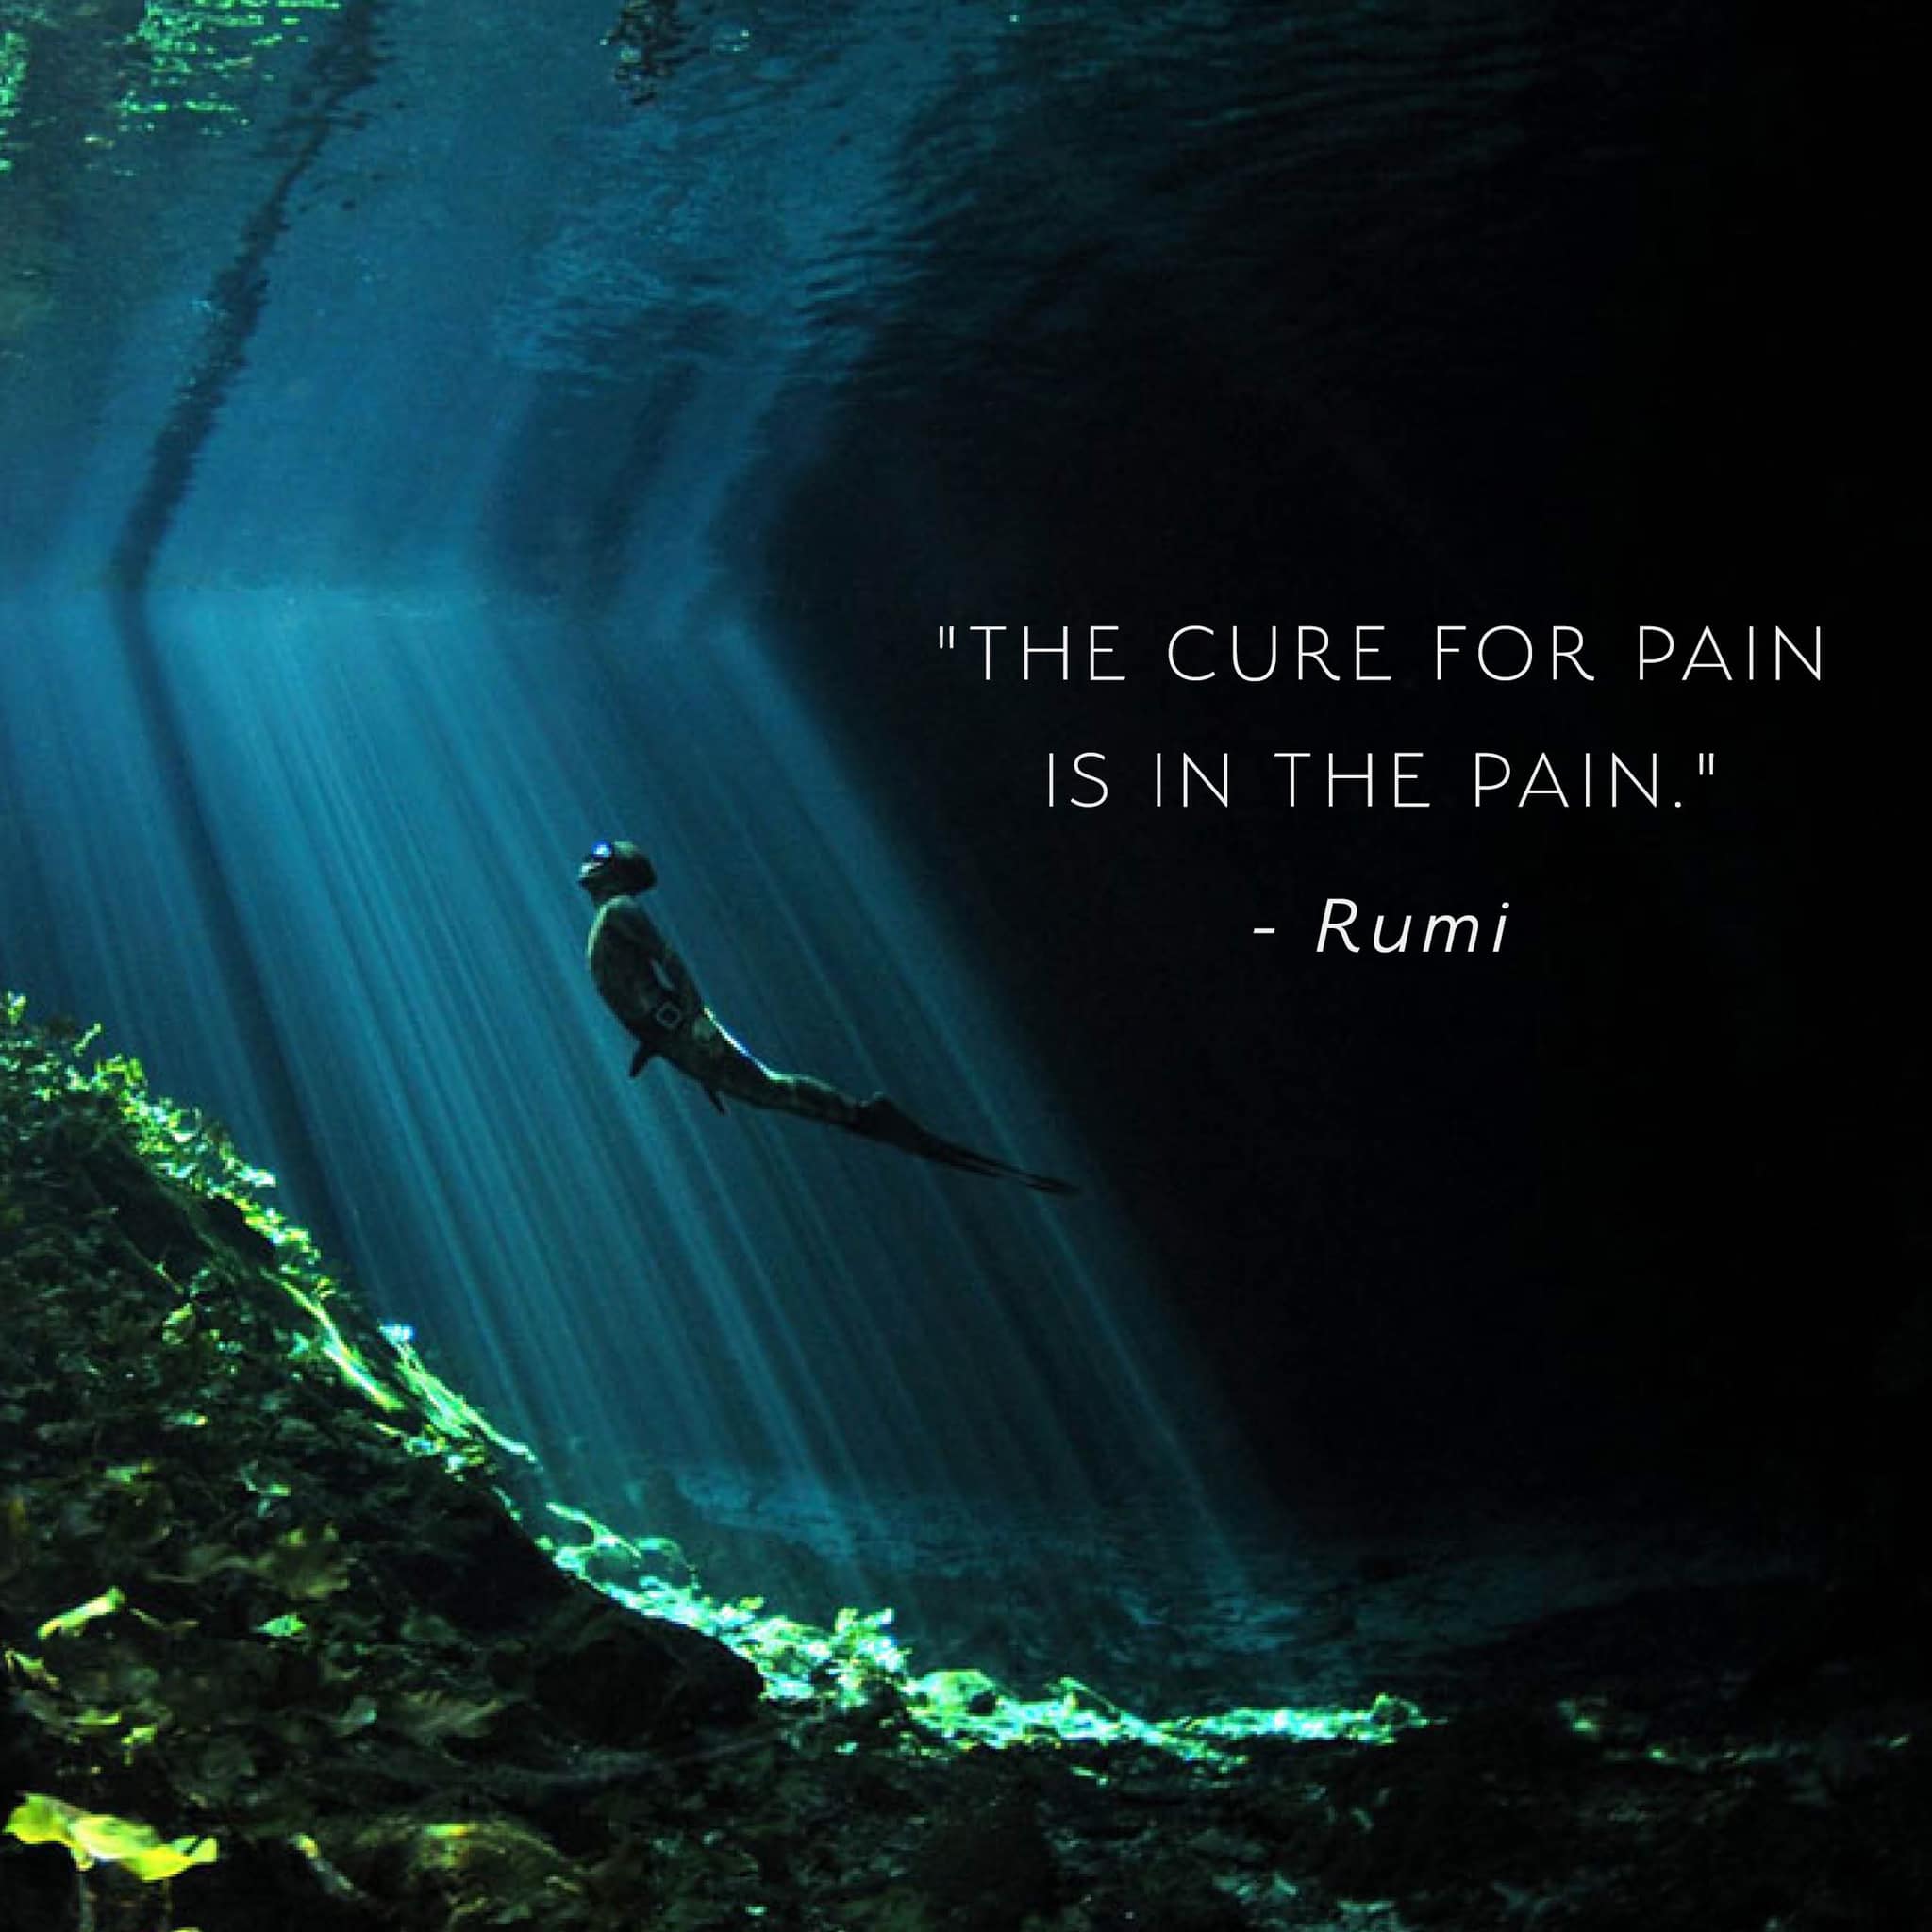 The cure for pain is in the pain.